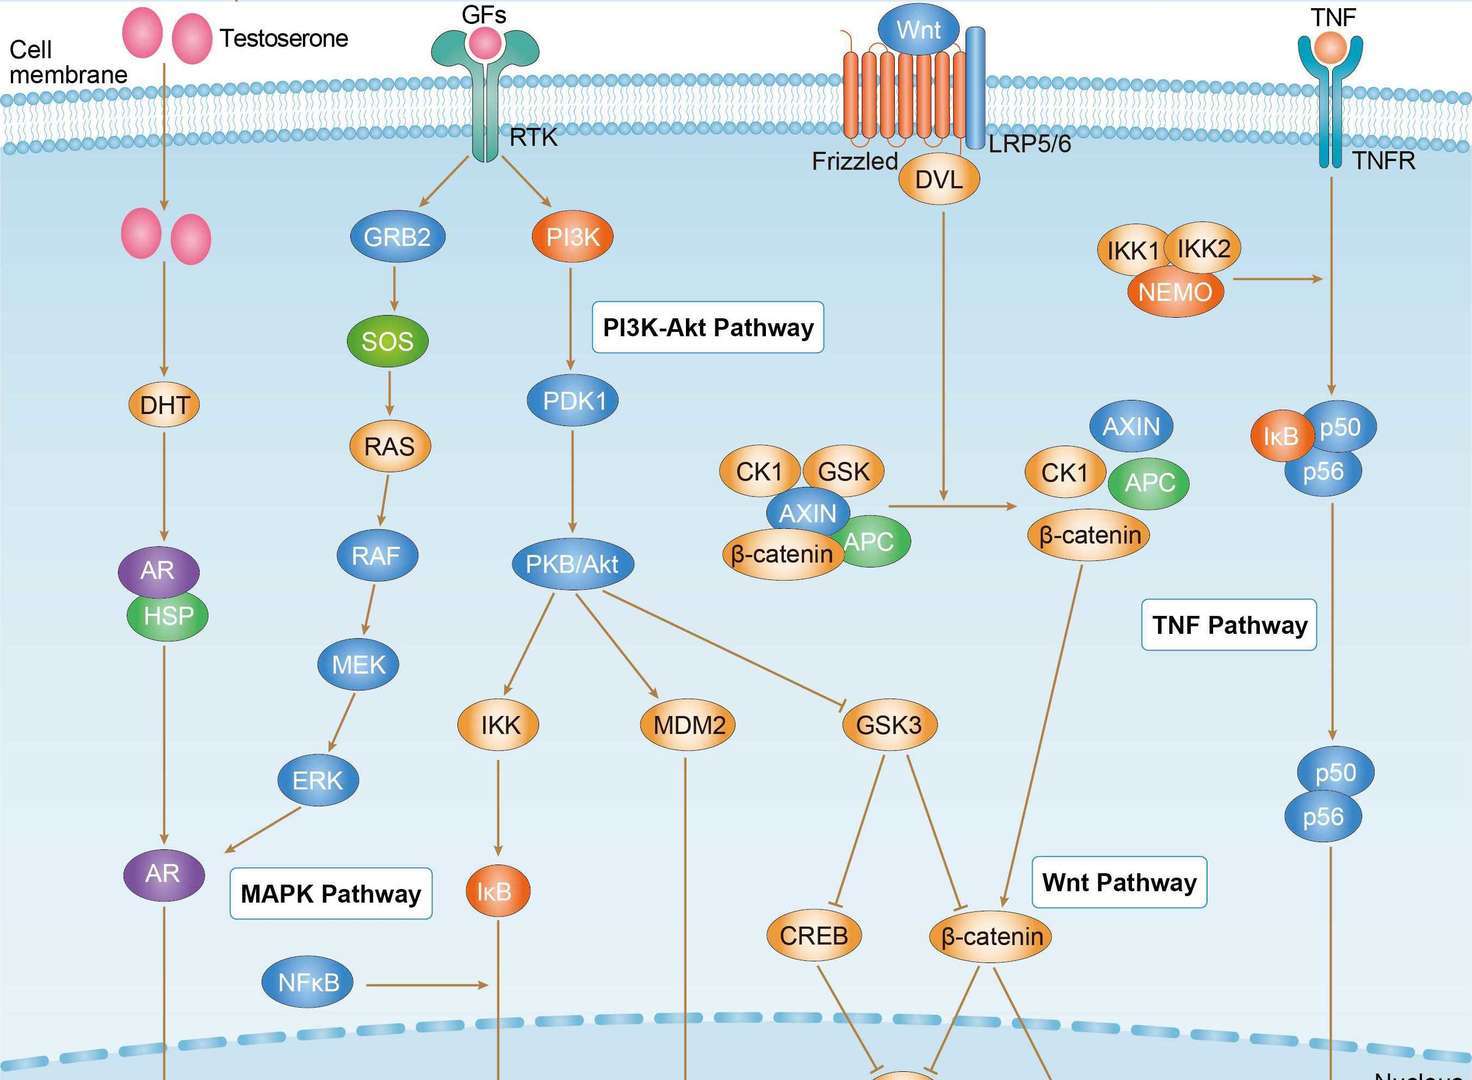 Prostate Cancer Overview - Pathways, Diagnosis, Targeted Therapies